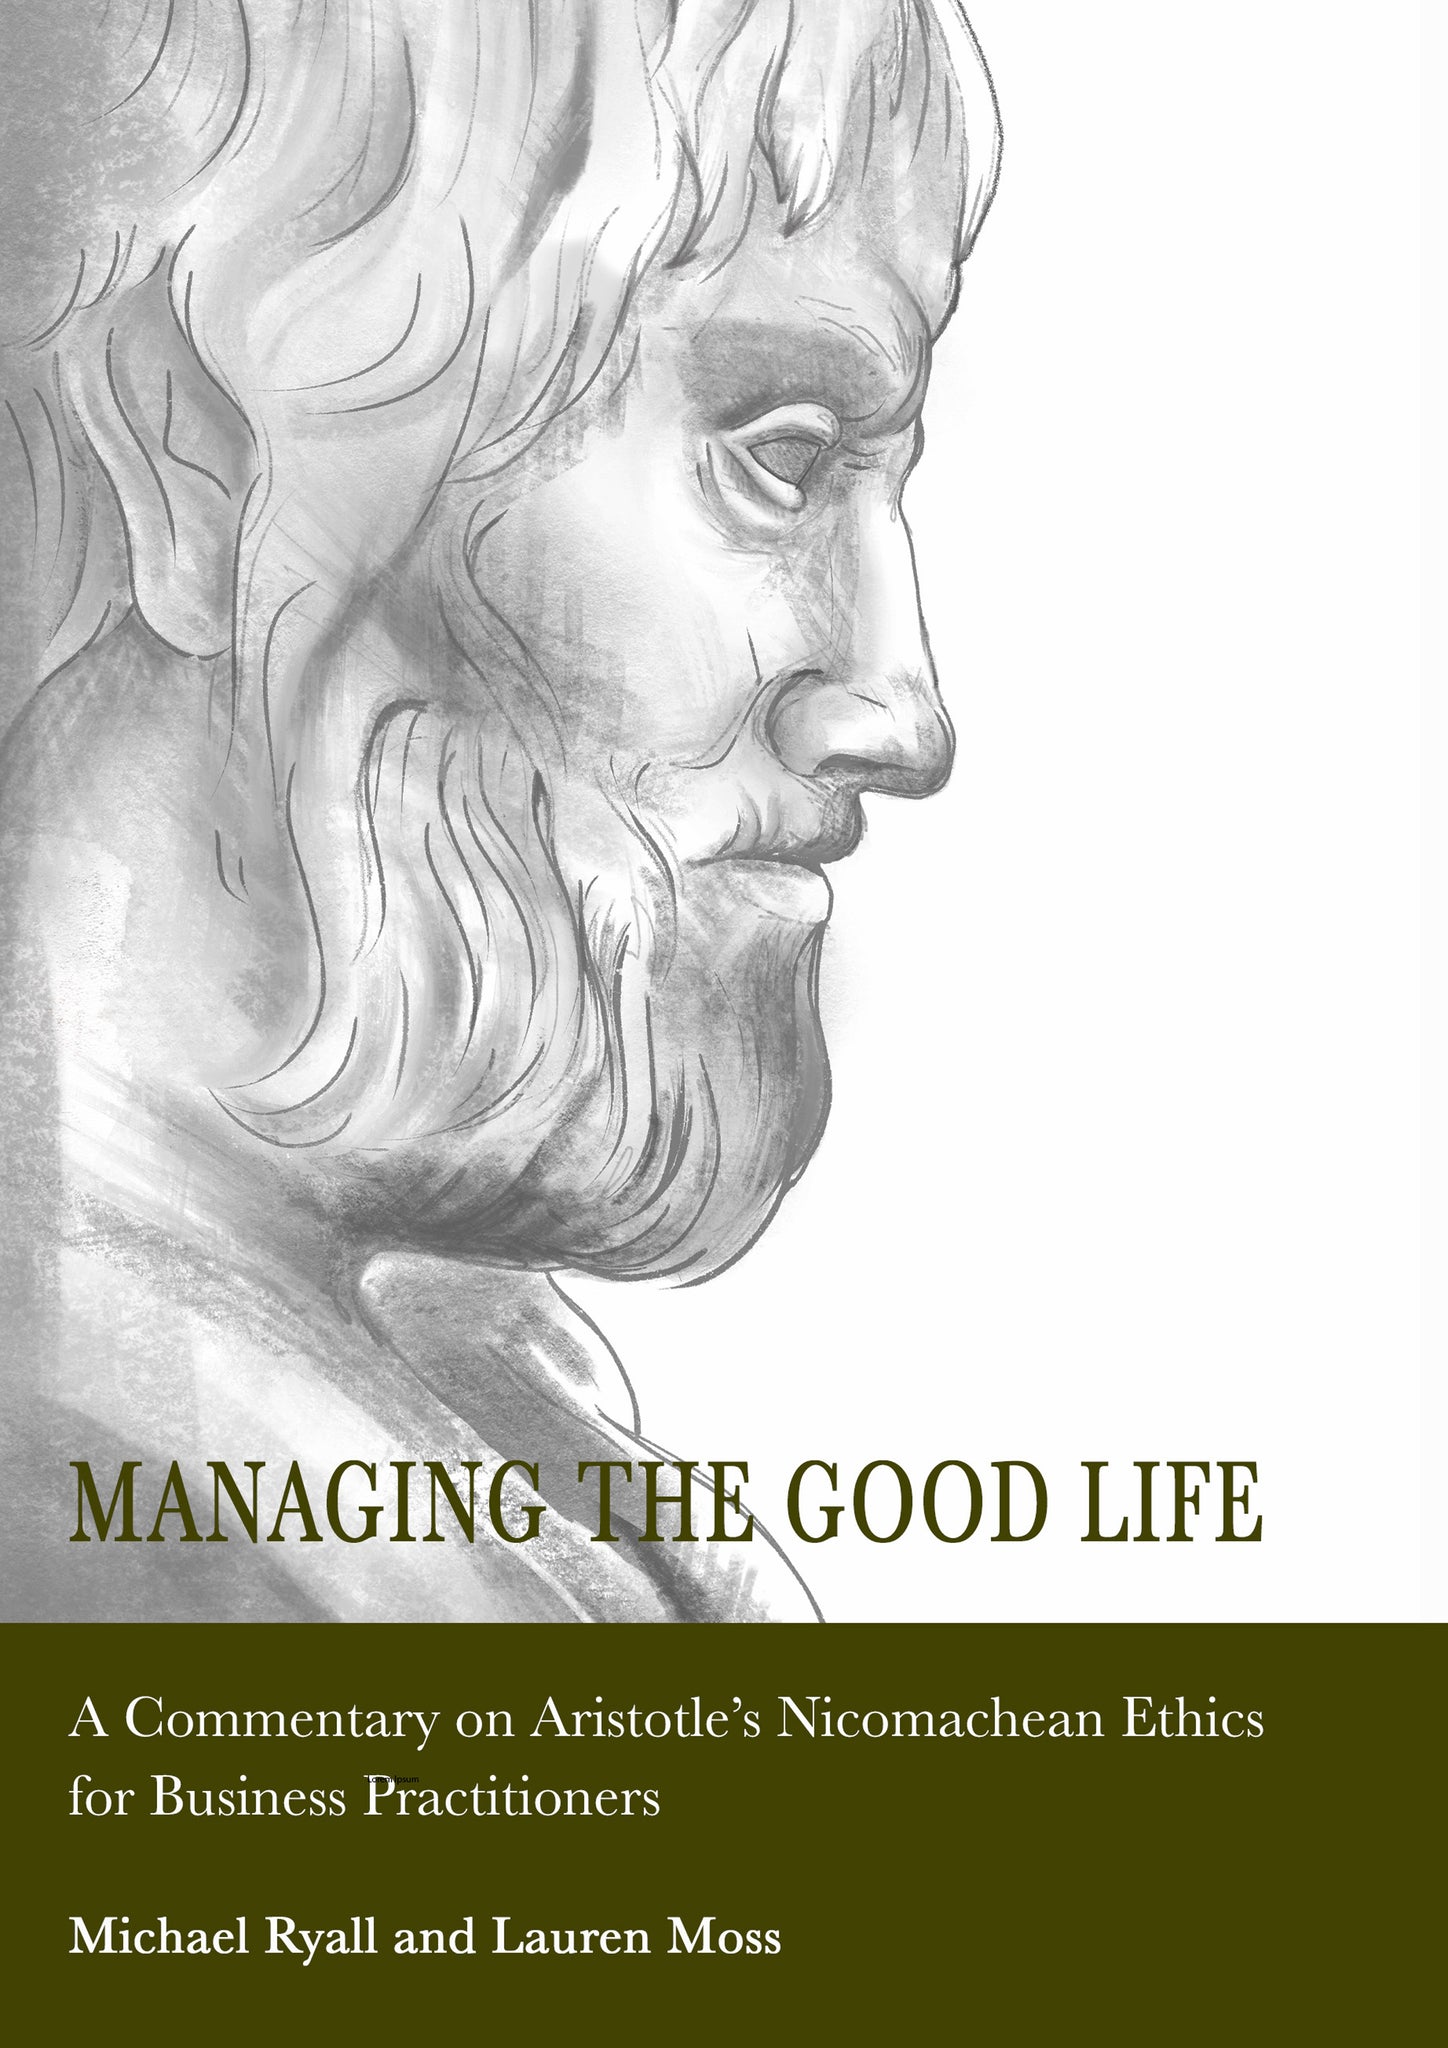 Managing the Good Life: A Commentary on Aristotle’s Nicomachean Ethics for Business Practitioners